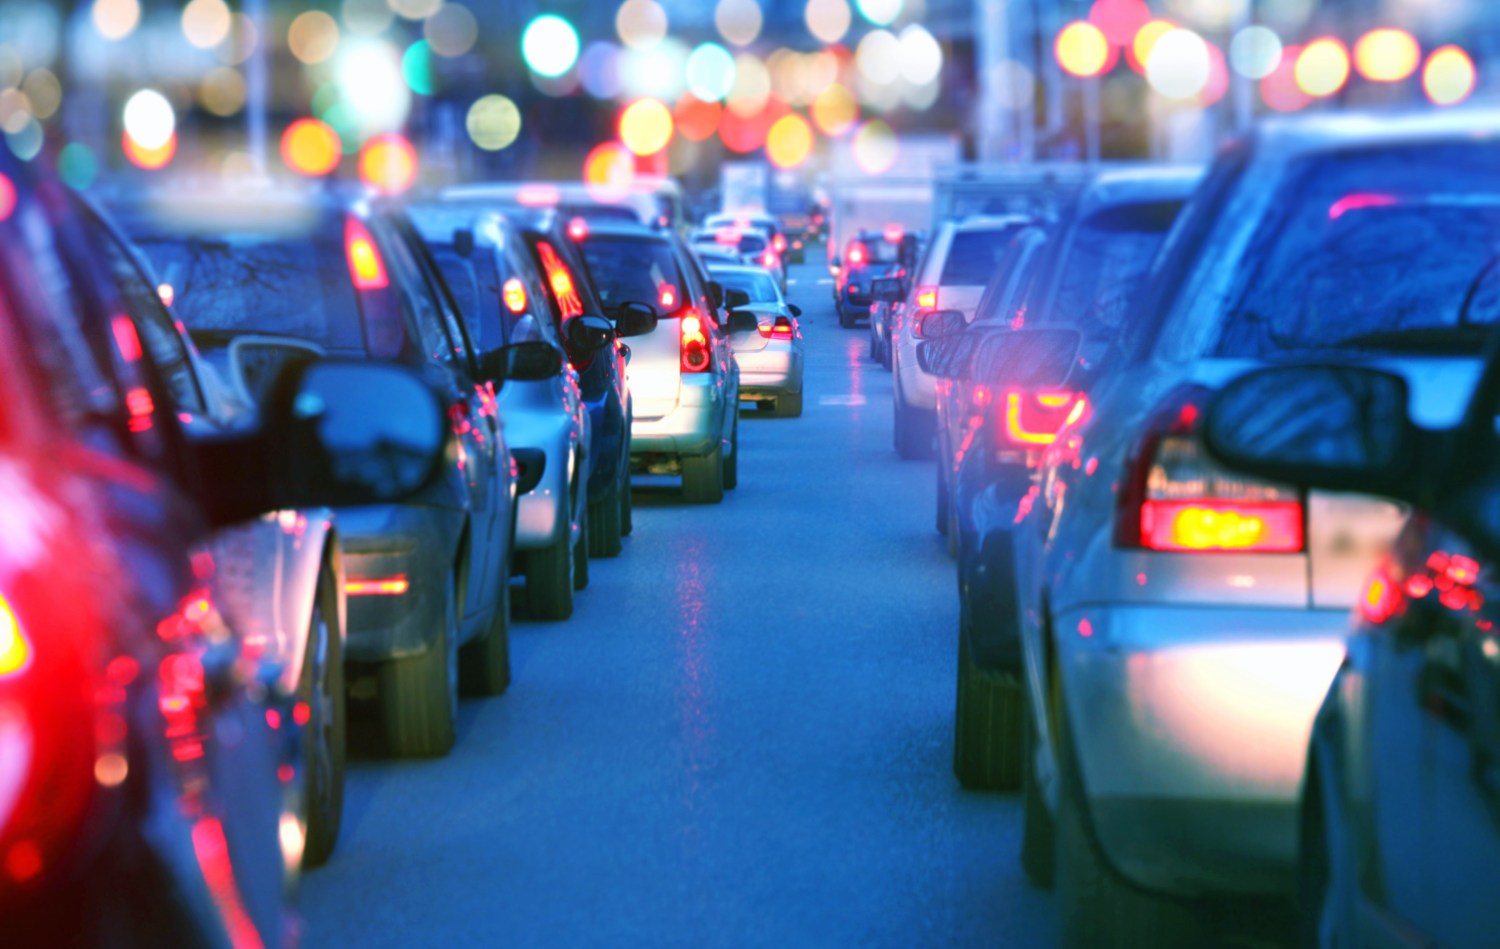 iStock Images. Driving a car in a a city with a traffic jam at night, proceeding slow in a line of cars with red tail lights during the rush hour. view from inside the car. Blurred streets lights on the background. Dusk, blue skylight.